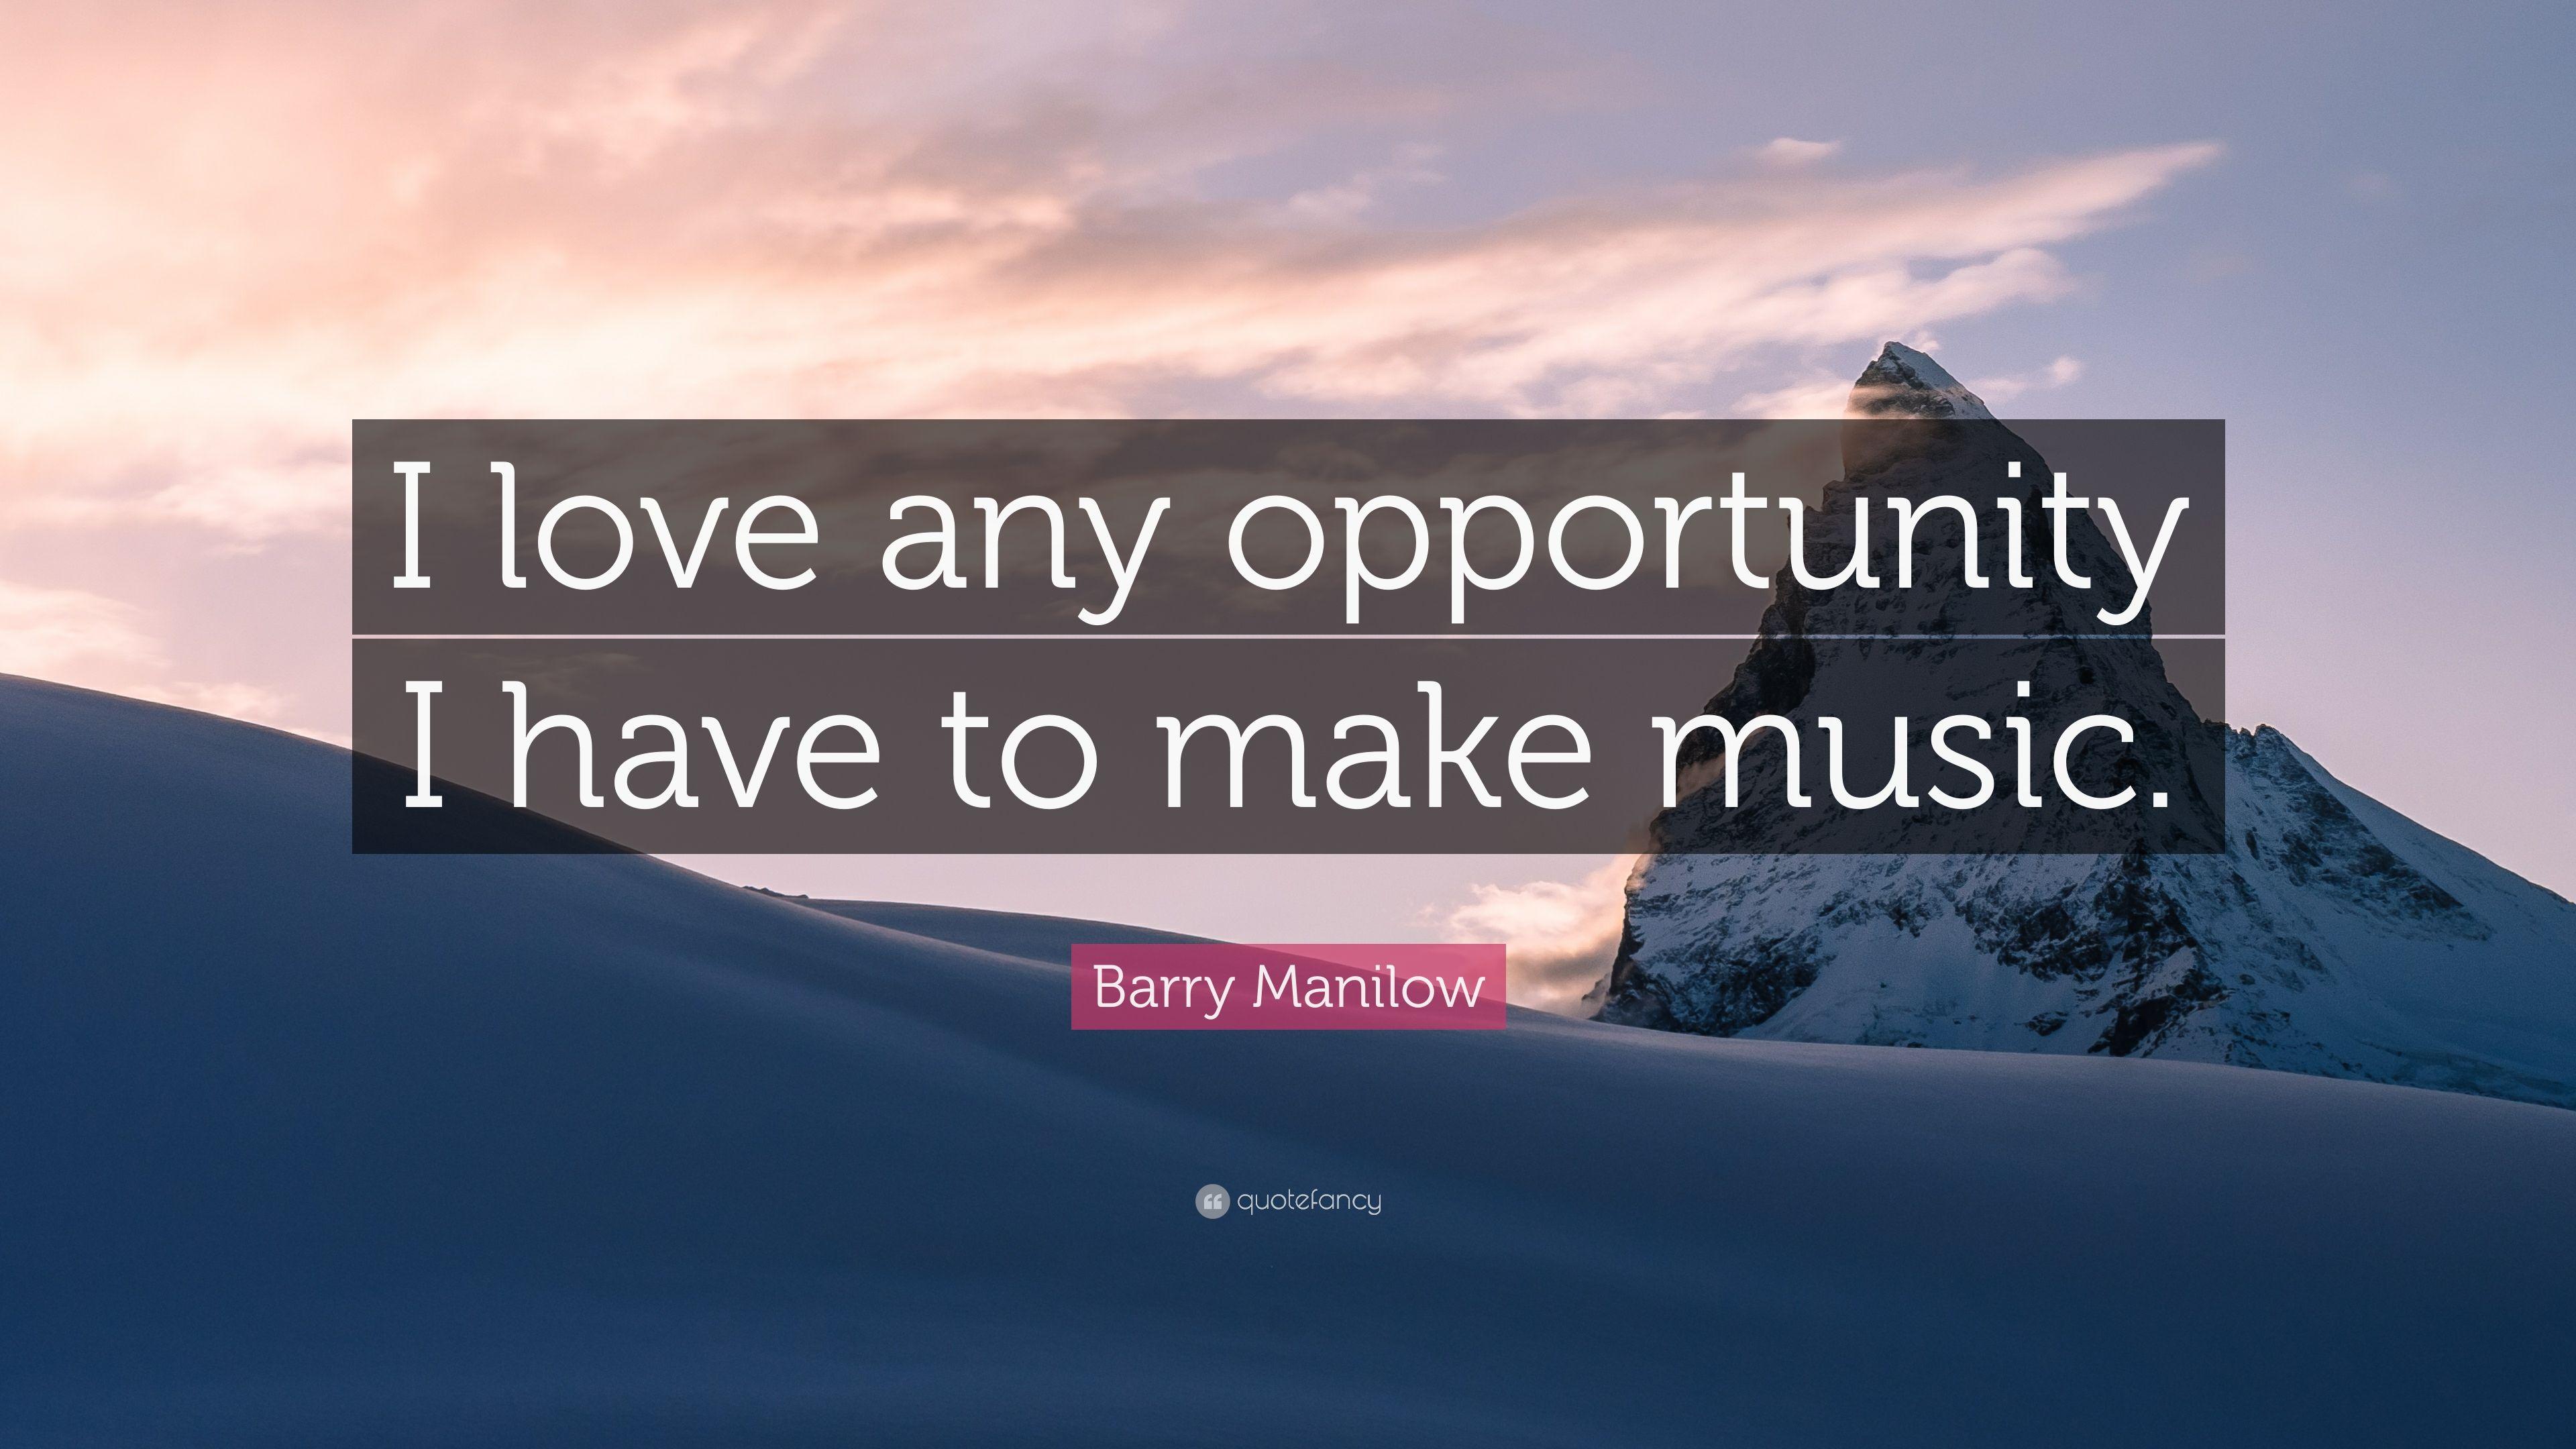 Barry Manilow Quote: “I love any opportunity I have to make music